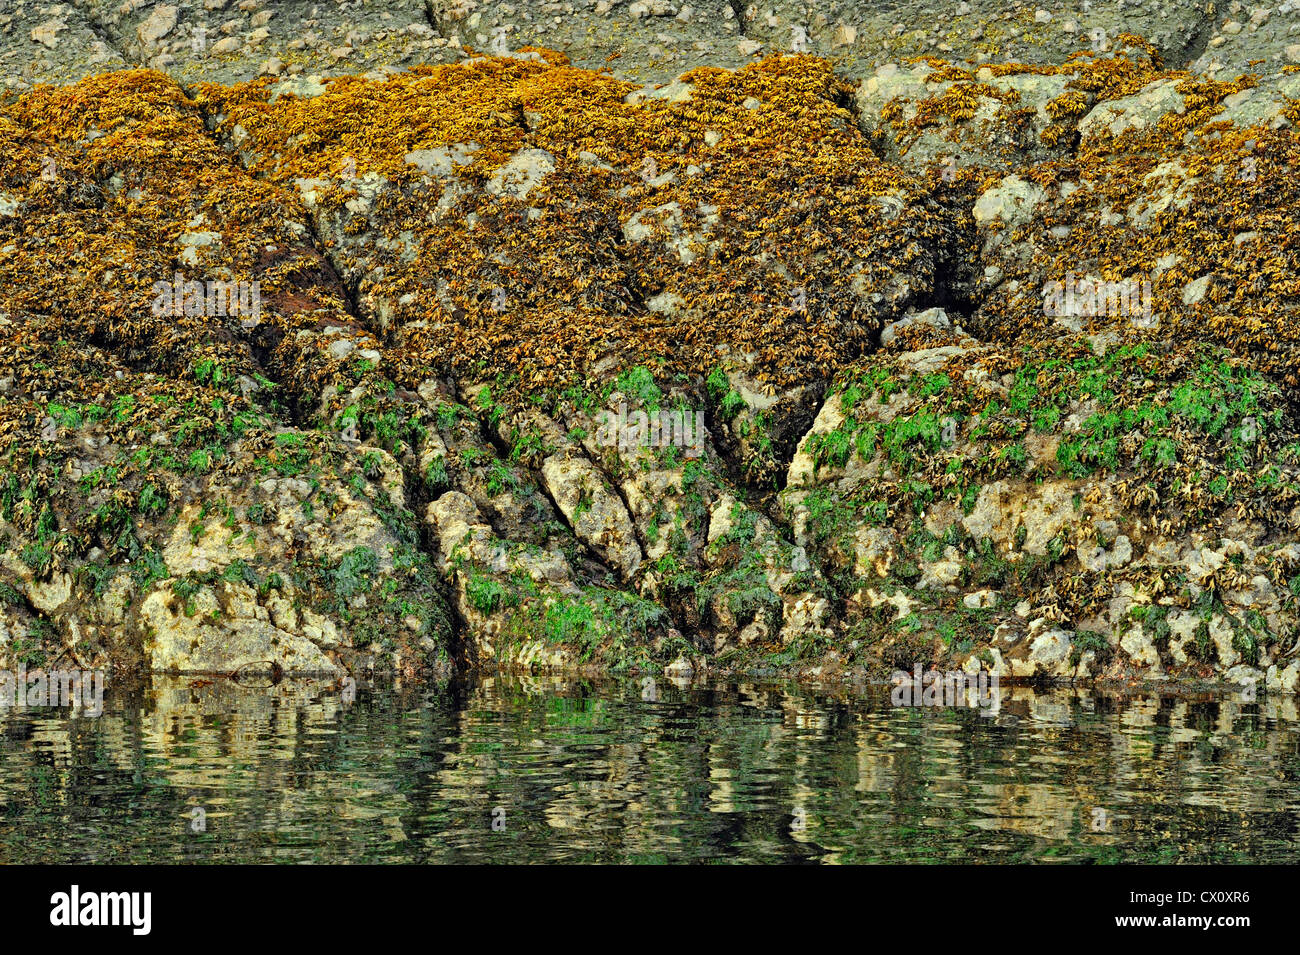 Sea lettuce and fucus stratified on rock wall of Hanson Island at low tide, Vancouver Island, BC, Canada Stock Photo